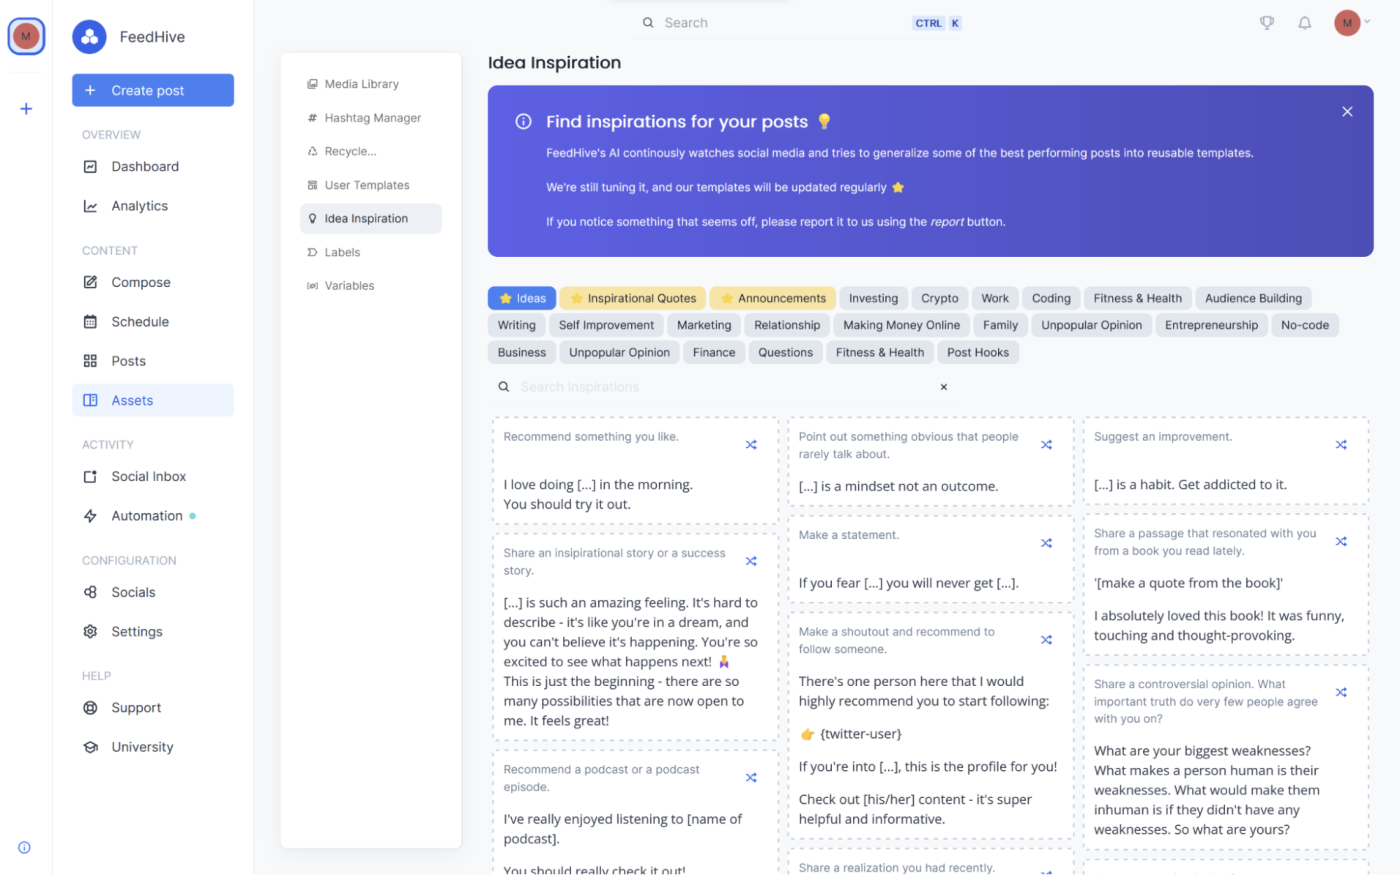 FeedHive, our pick for the best AI marketing tool for social media management.